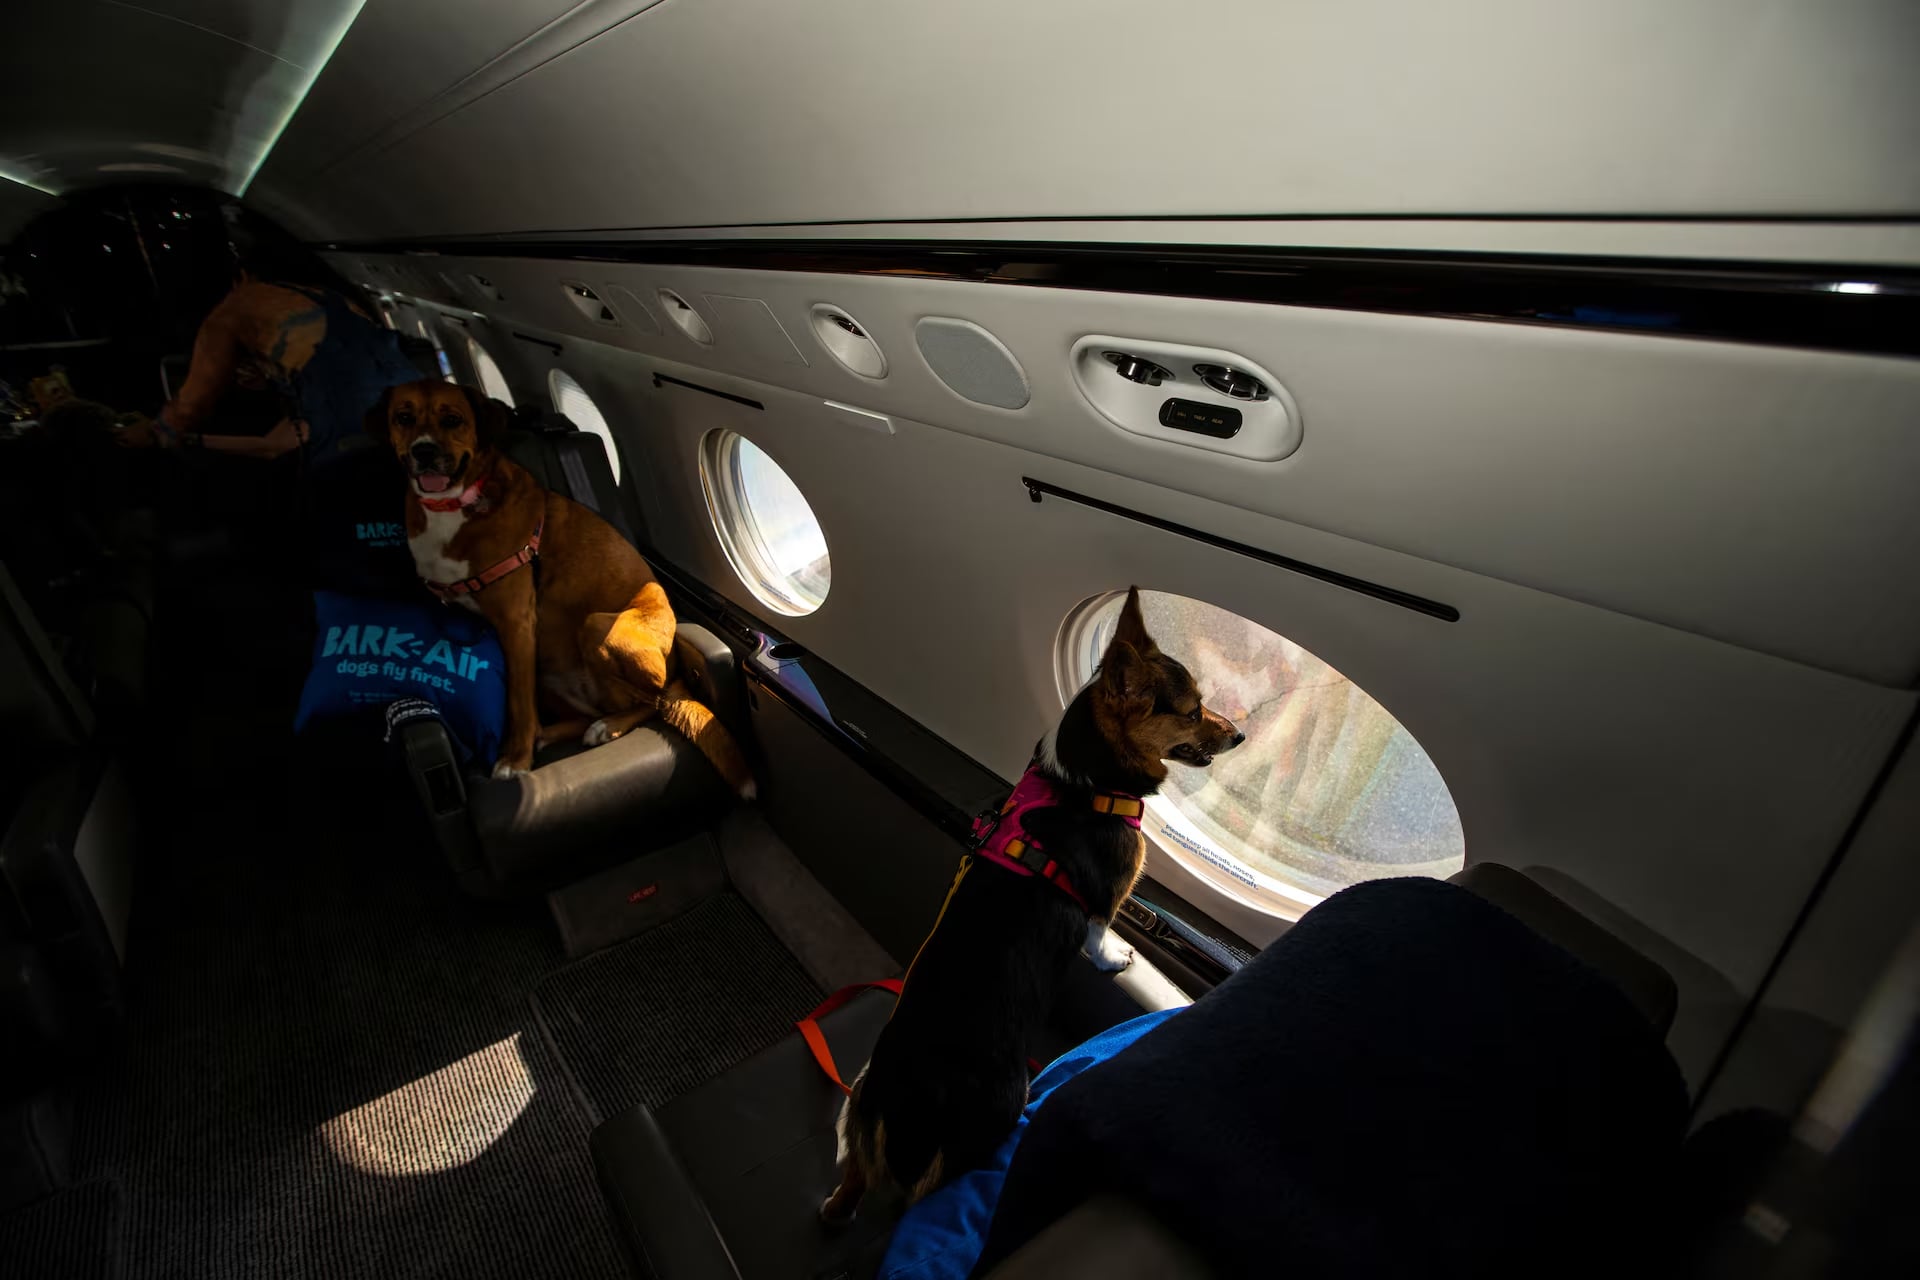 A dog looks out from a plane’s window during a press event introducing Bark Air, an airline for dogs, at Republic Airport in East Farmingdale, New York, May 21. Photo: Reuters